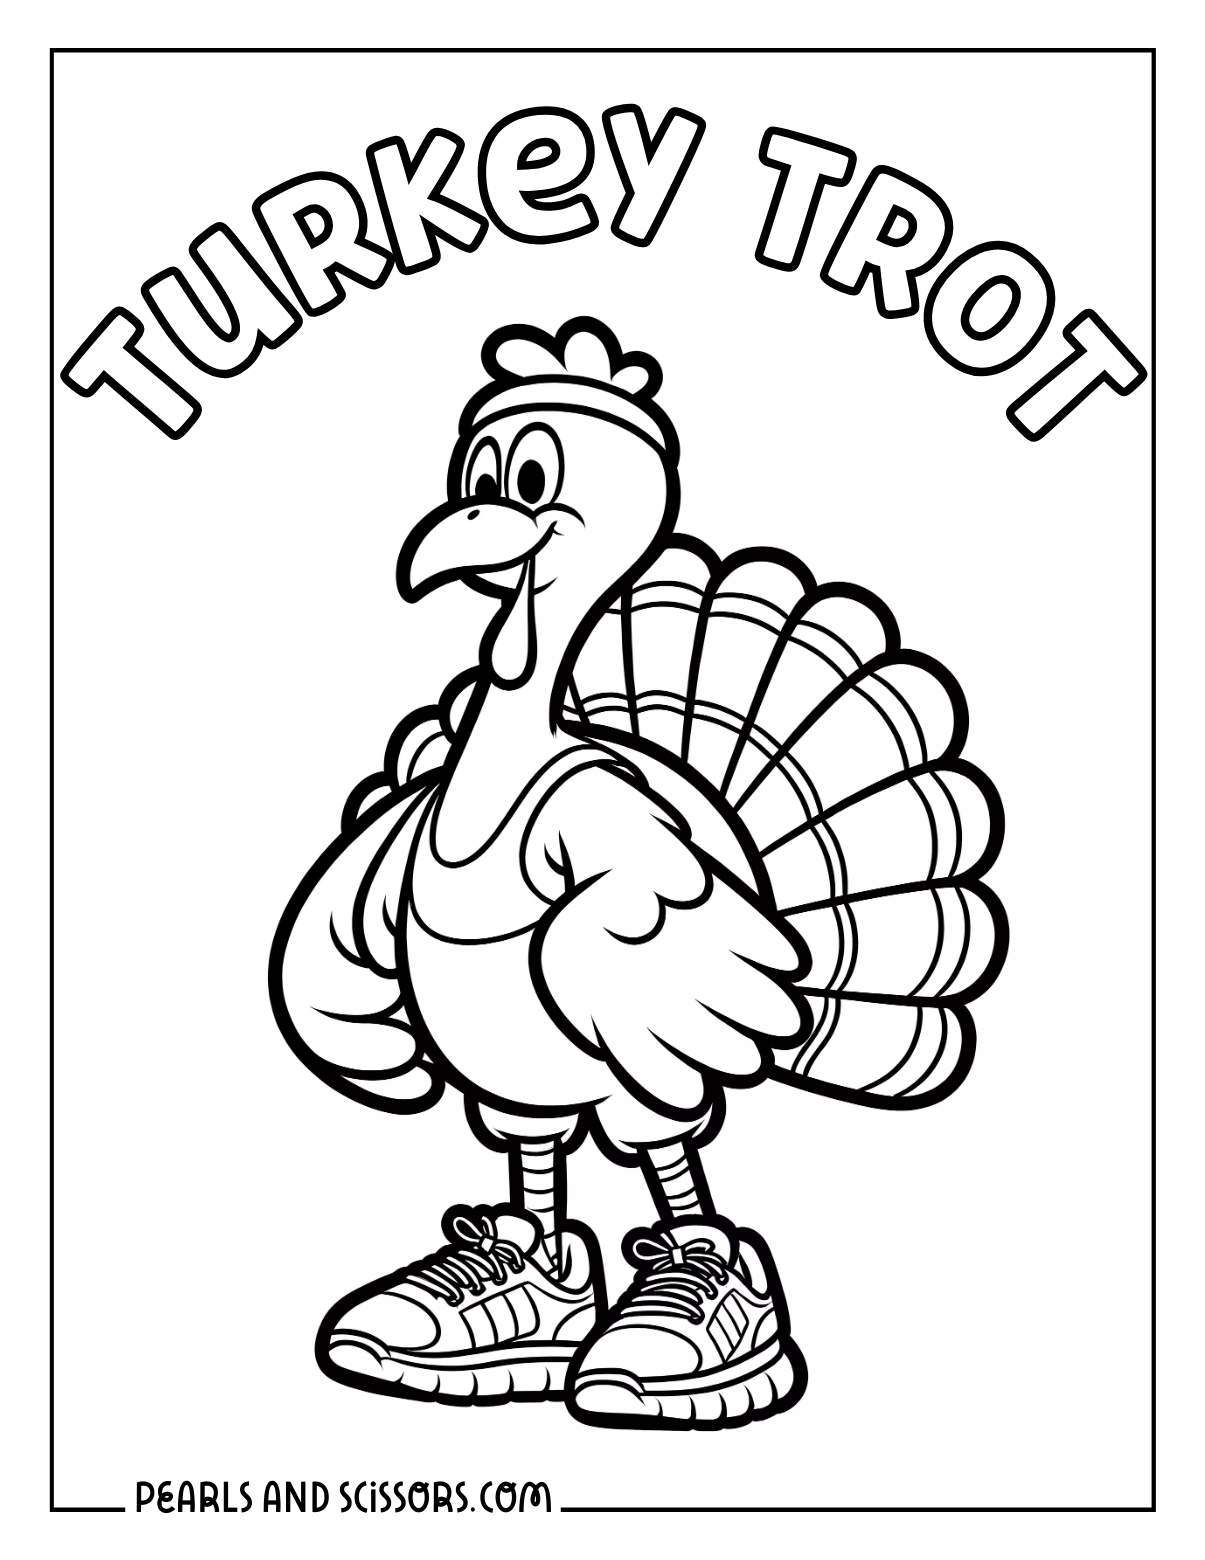 Turkey trot cartoon thanksgiving coloring page for kids.